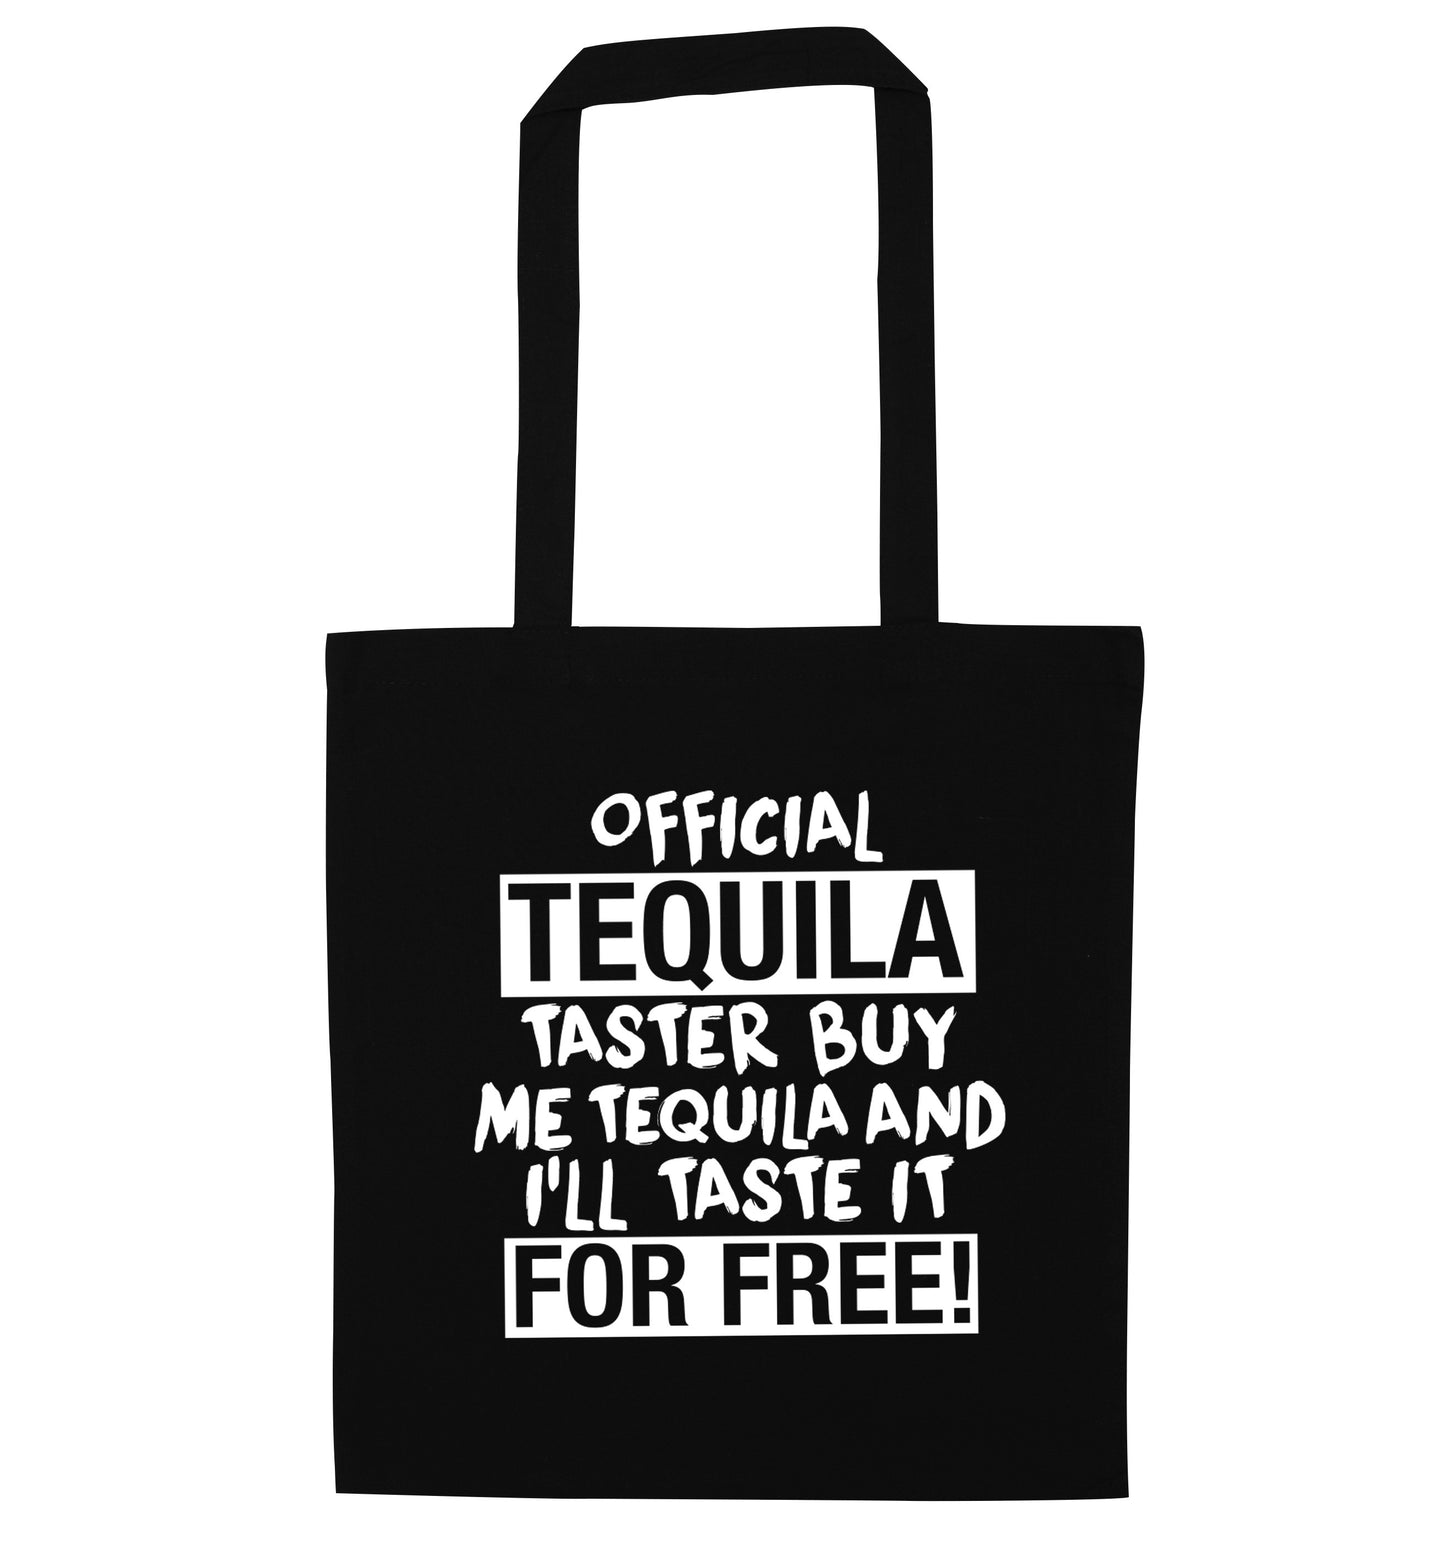 Official tequila taster buy me tequila and I'll taste it for free black tote bag